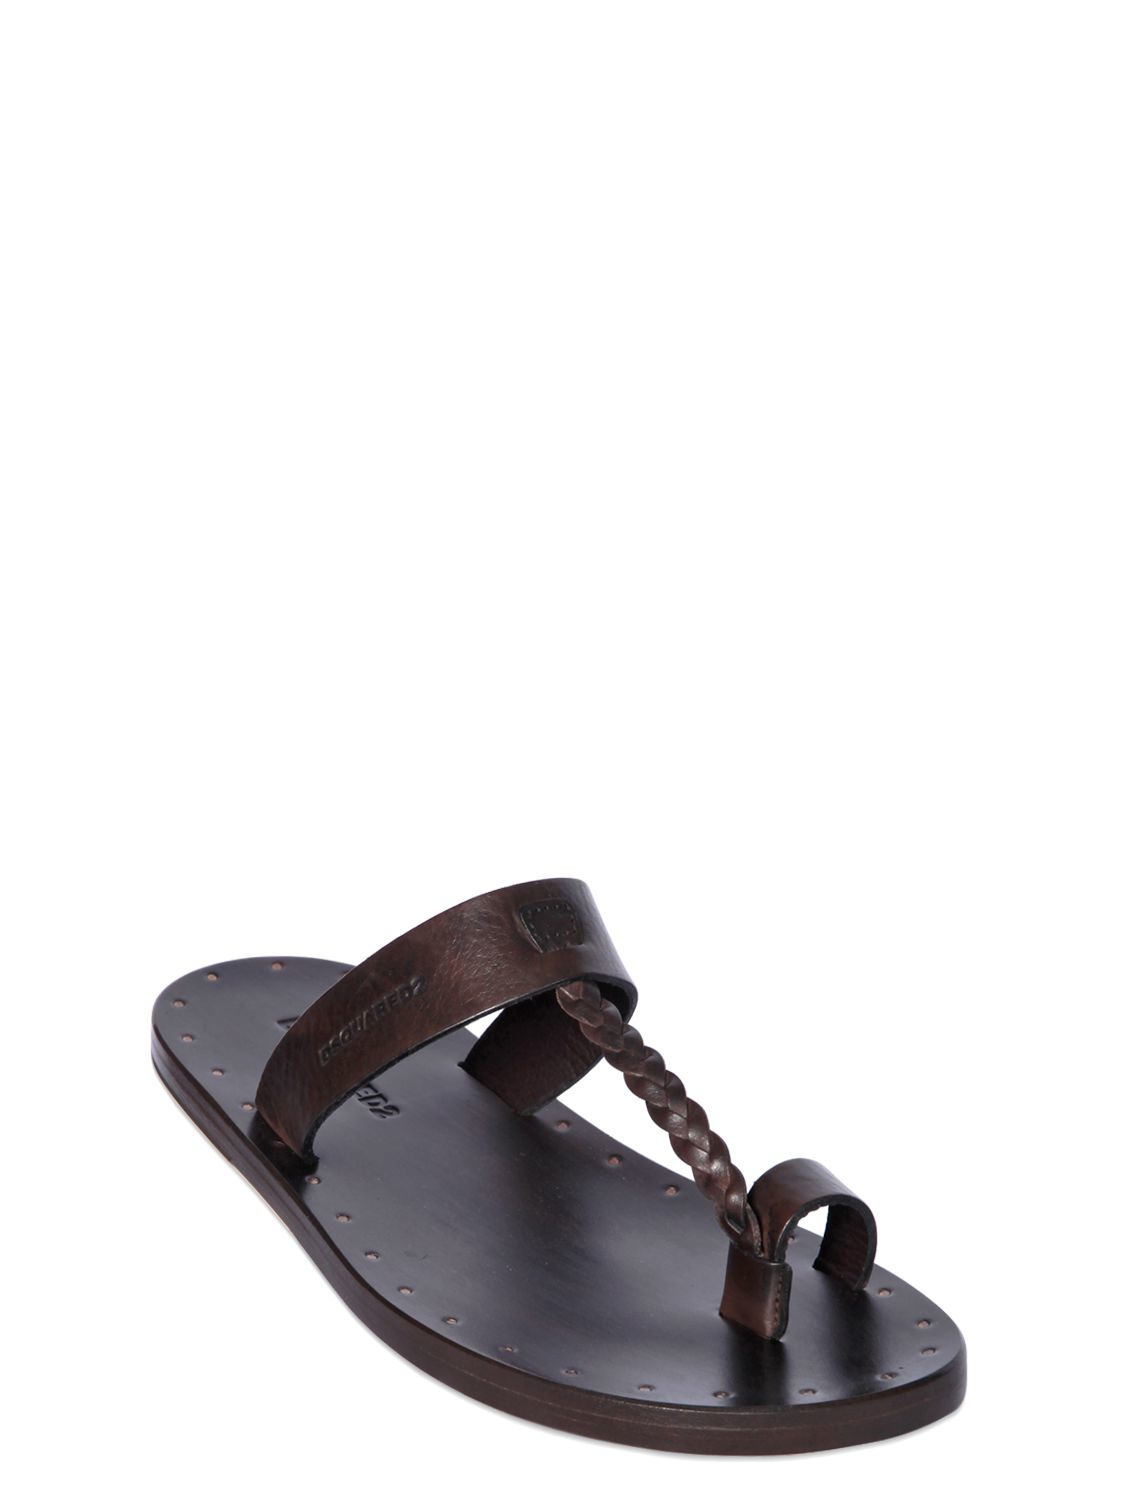 Lyst - DSquared² Moses Braided Detail Leather Sandals in Brown for Men